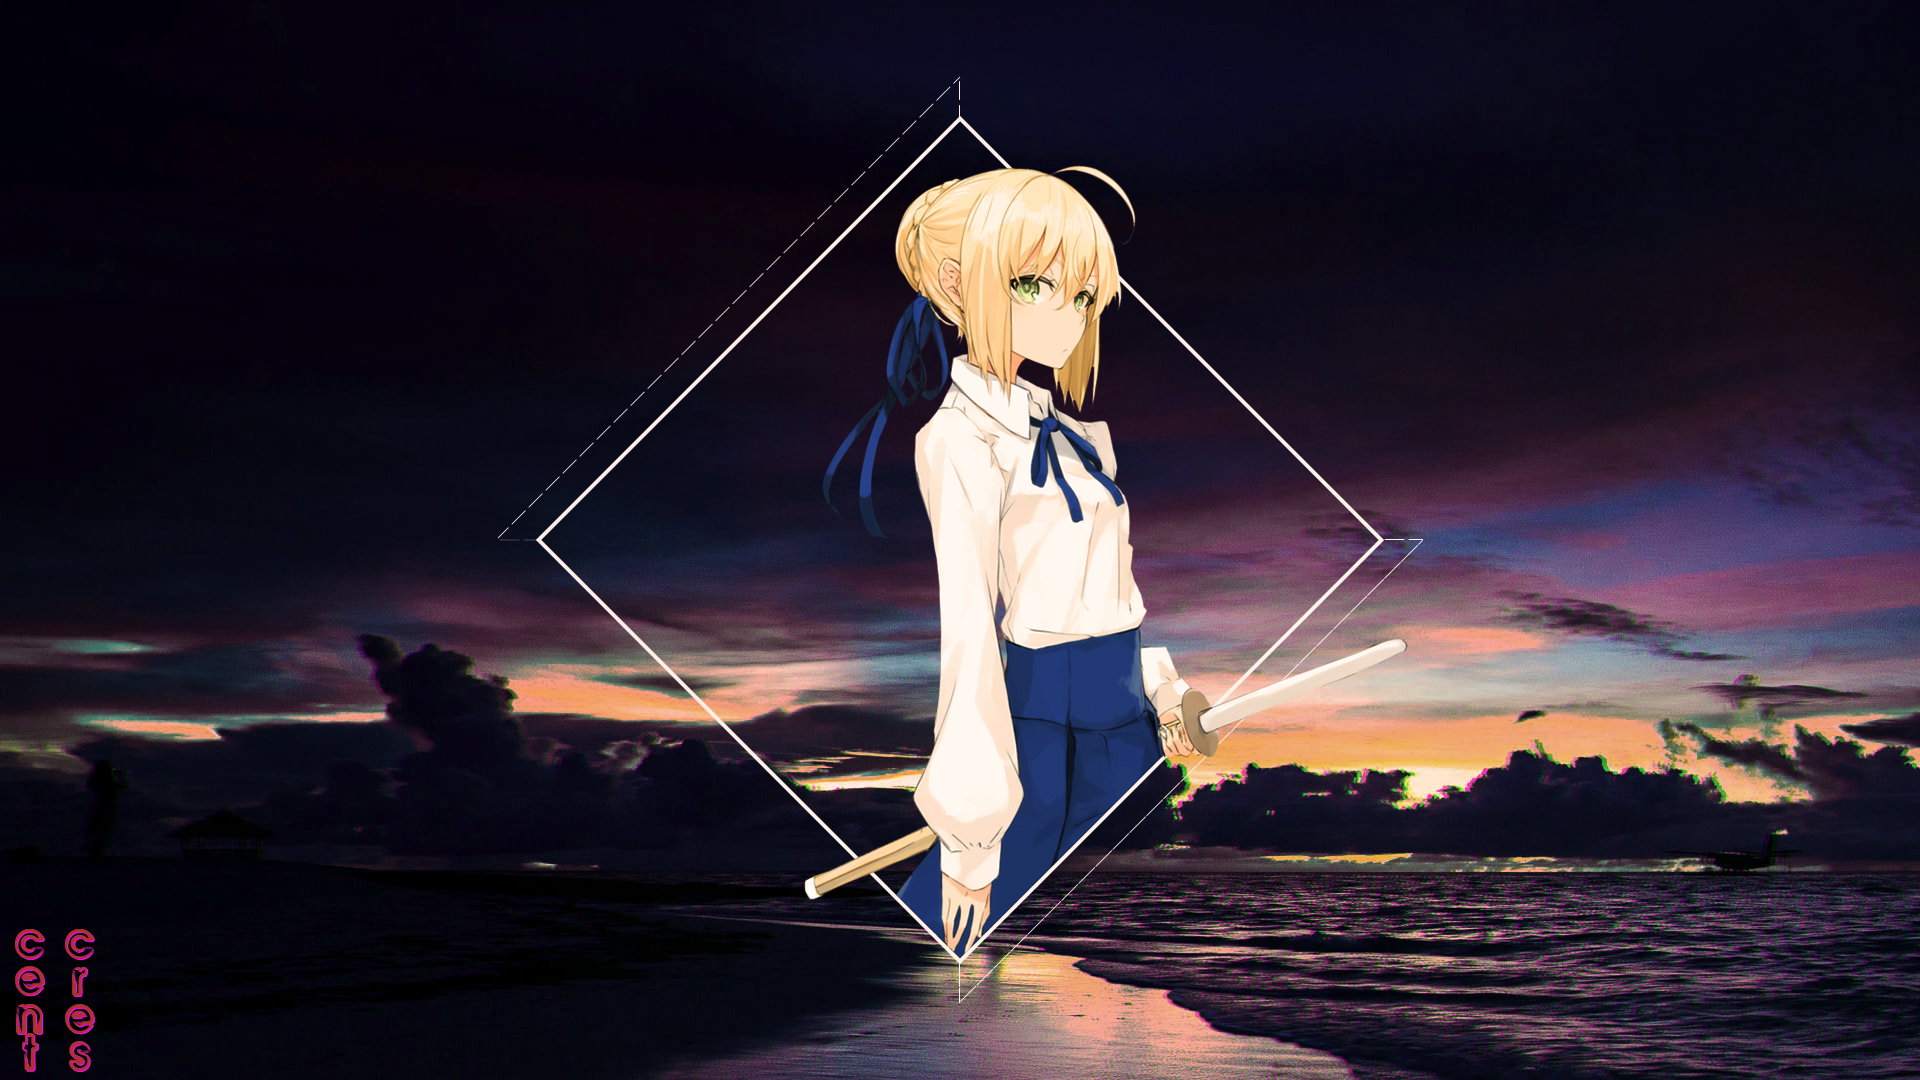 Anime 1920x1080 Saber Fate/Grand Order anime girls anime green eyes blonde picture-in-picture